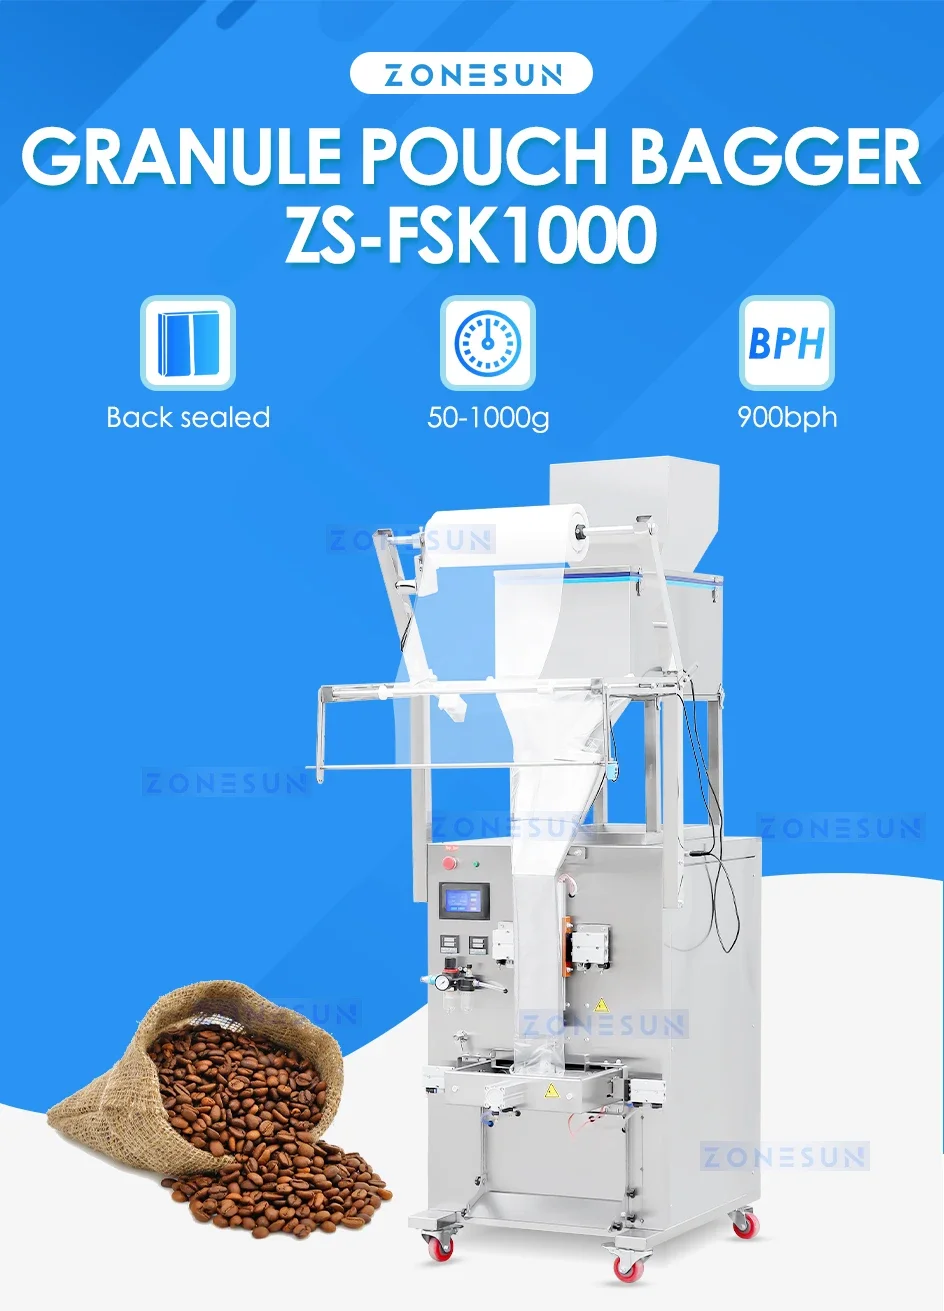 ZONESUN Automatic Vertical Form Pouch Granule Particle Filling and Sealing Machine ZS-FSK1000